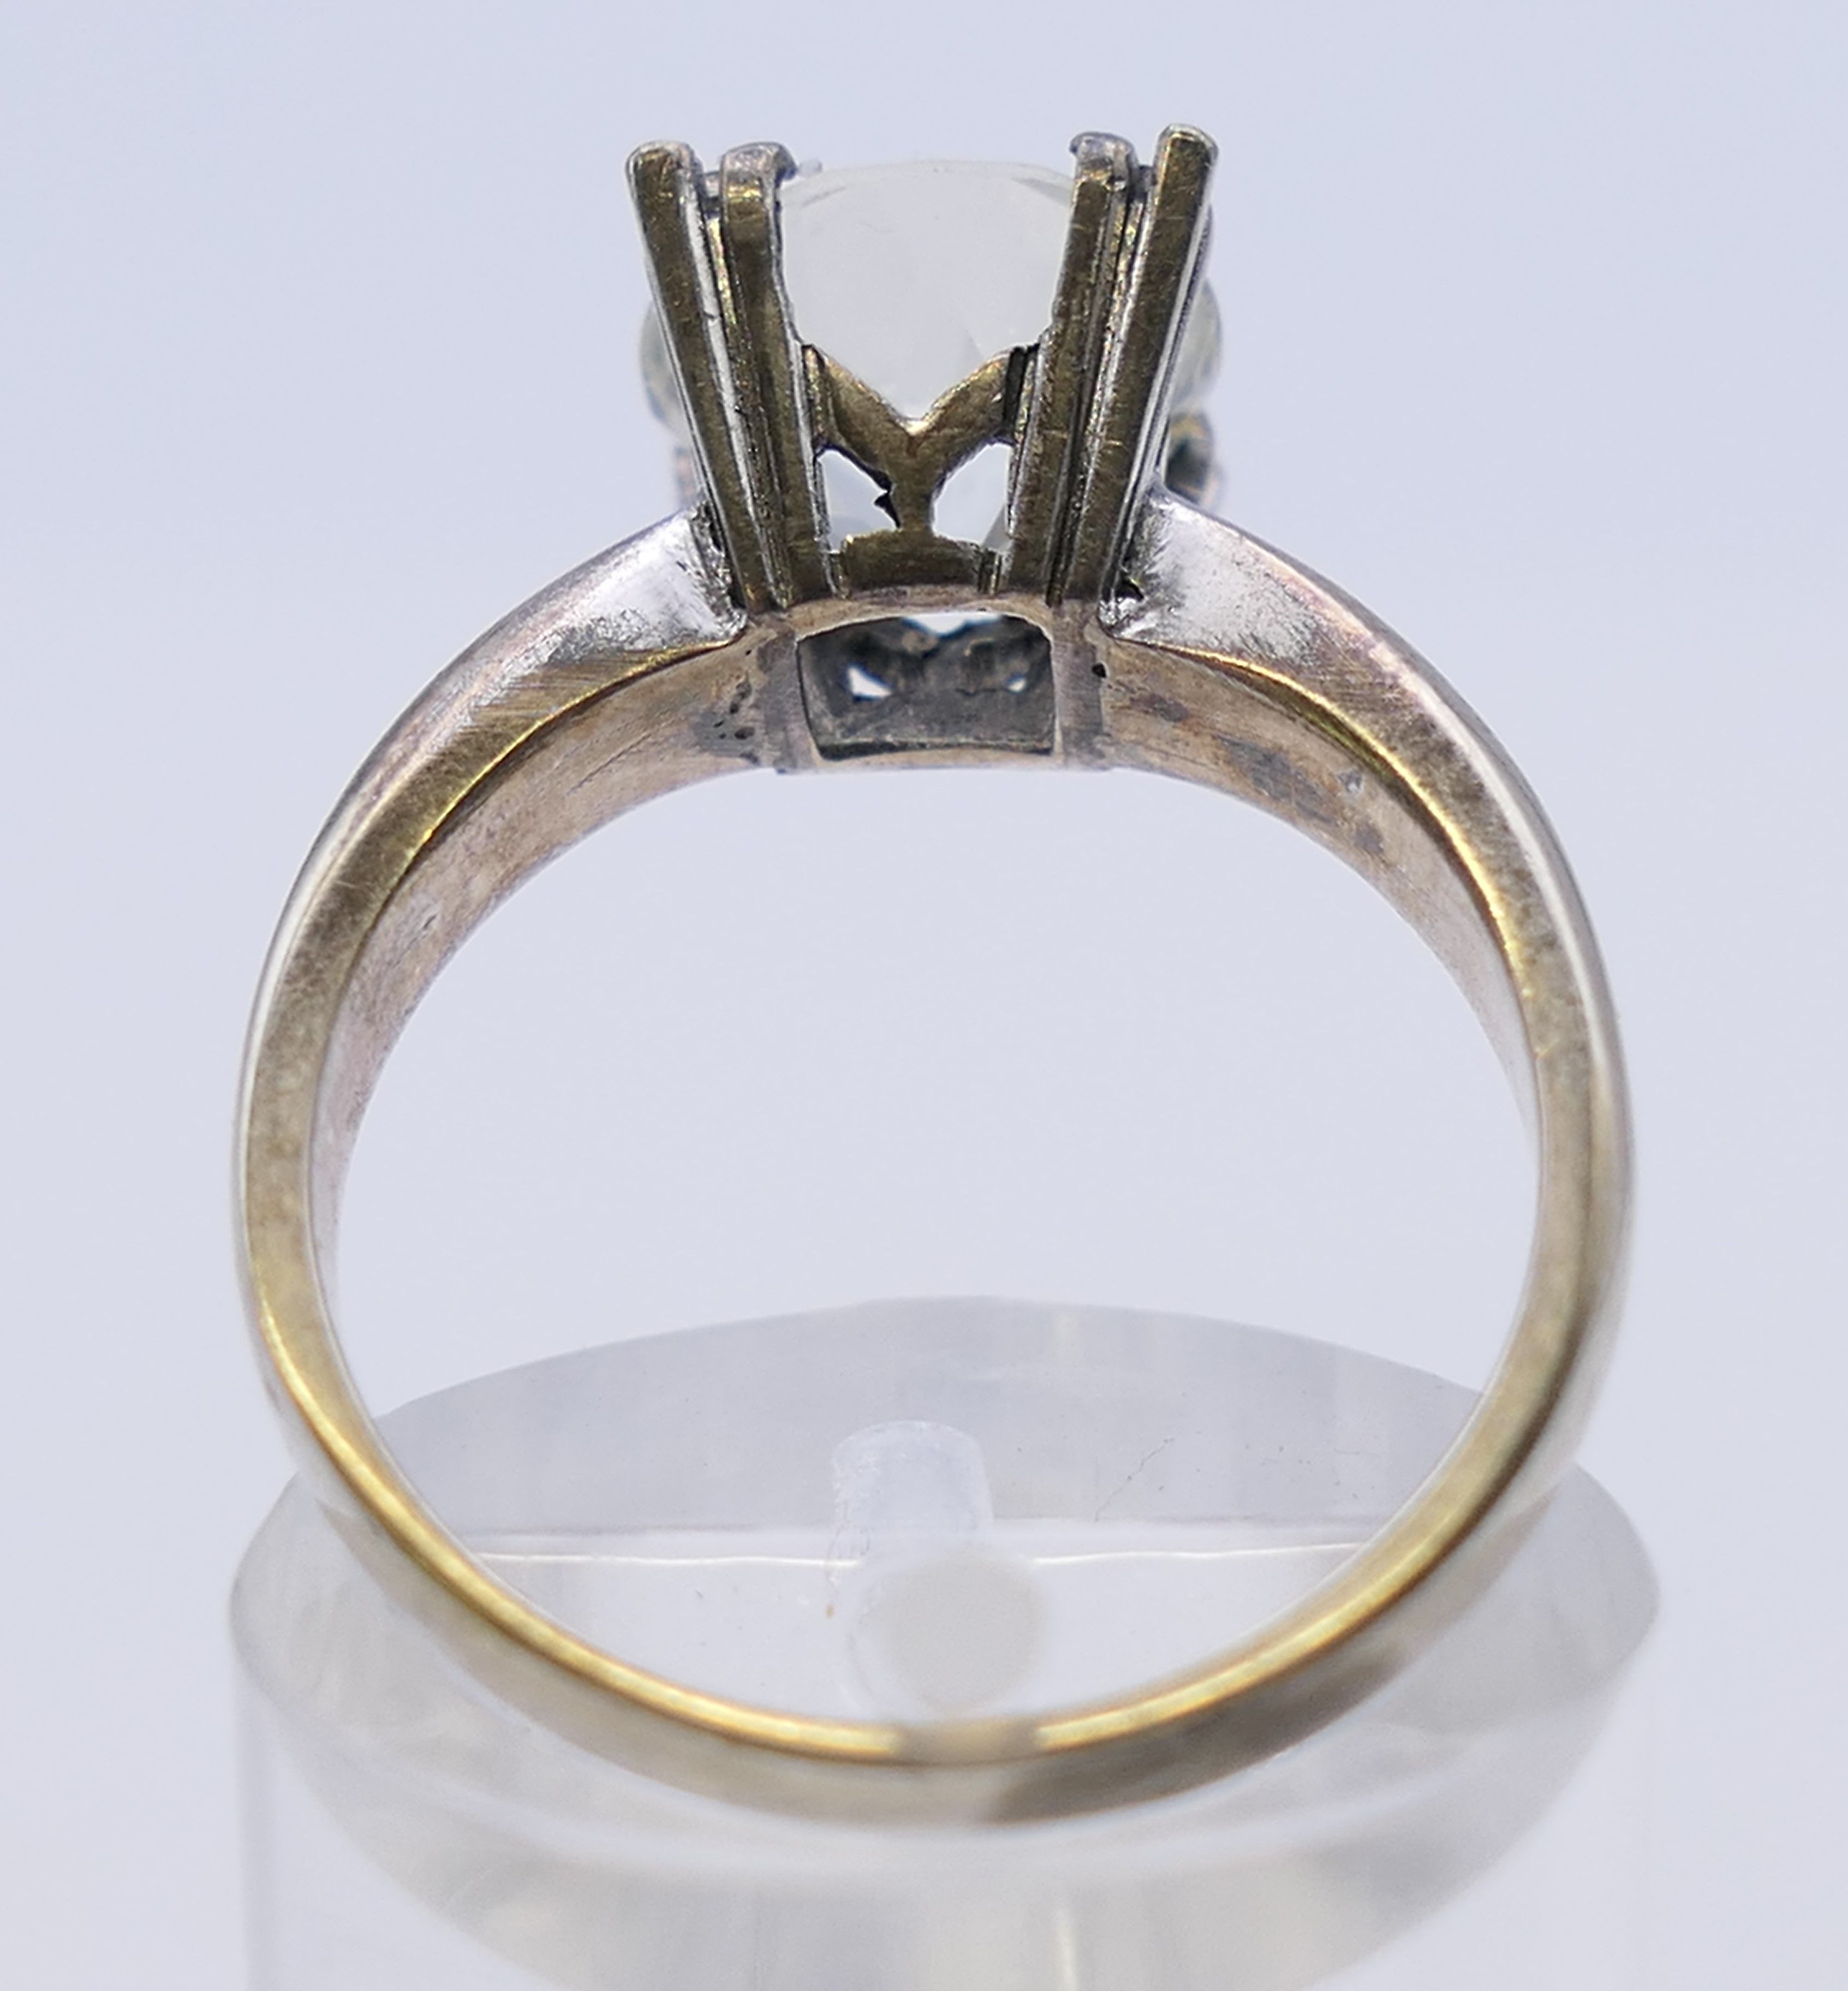 An unmarked solitaire ring, possibly white sapphire. Ring size M/N. - Image 4 of 4